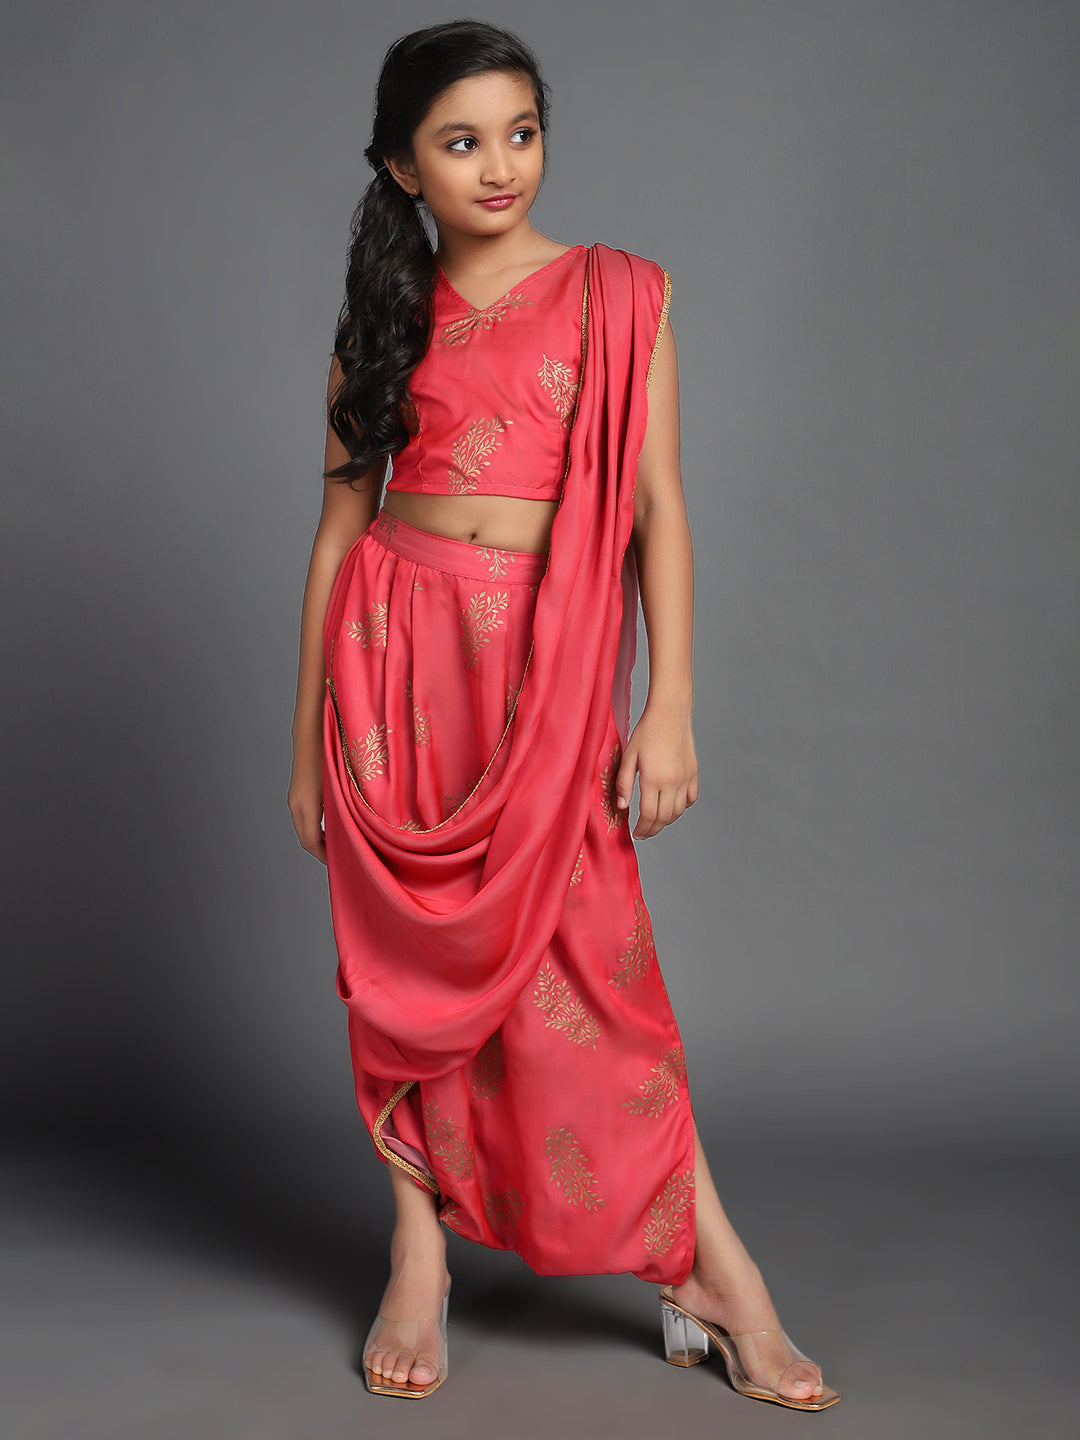 Girl's Red Foil Printed Dhoti Saree With Blouse - Aks Girls